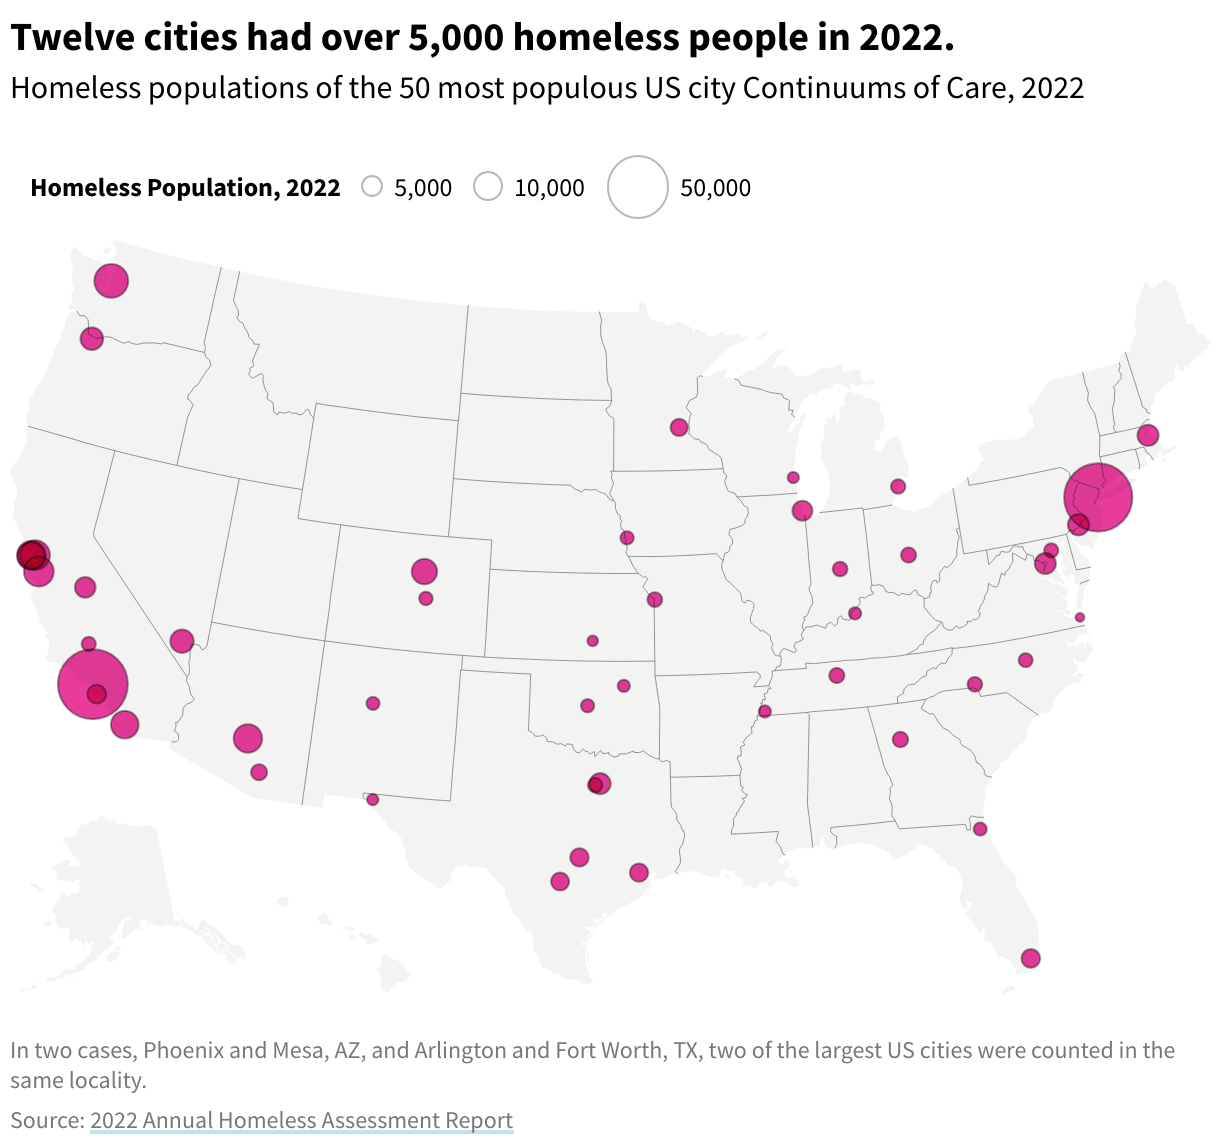 Map of the US with symbols above the 50 largest cities showing the number of homeless people. Circles are concentrated around New York, LA, and the San Francisco Bay Area. Seattle, Phoenix, Denver, and Dallas/Fort Worth have the next largest circles.